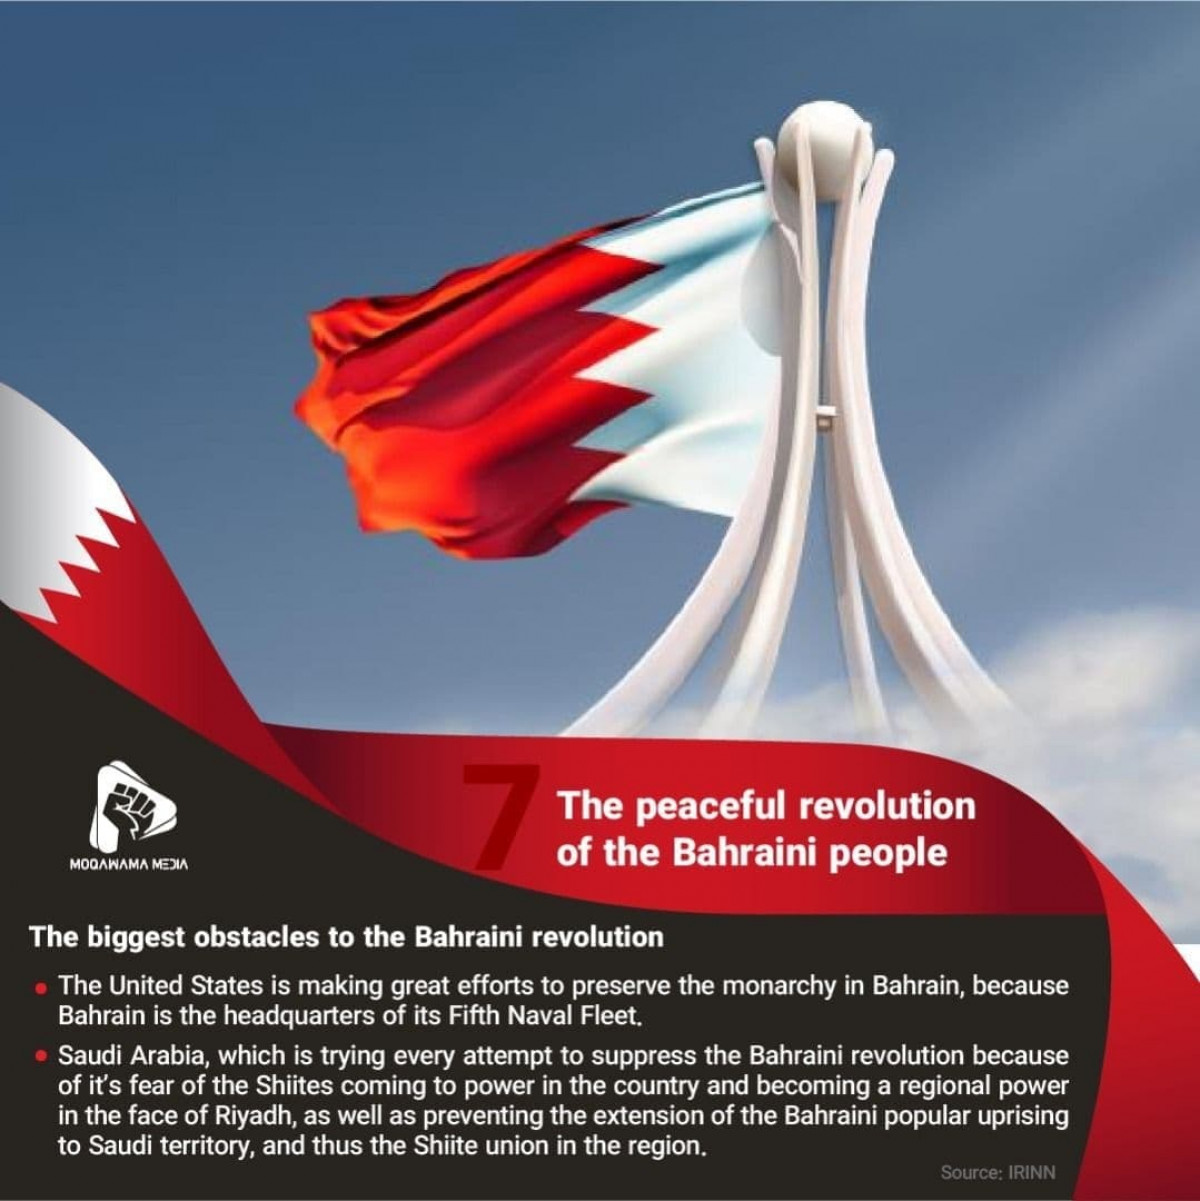 The biggest obstacles to the Bahraini revolution